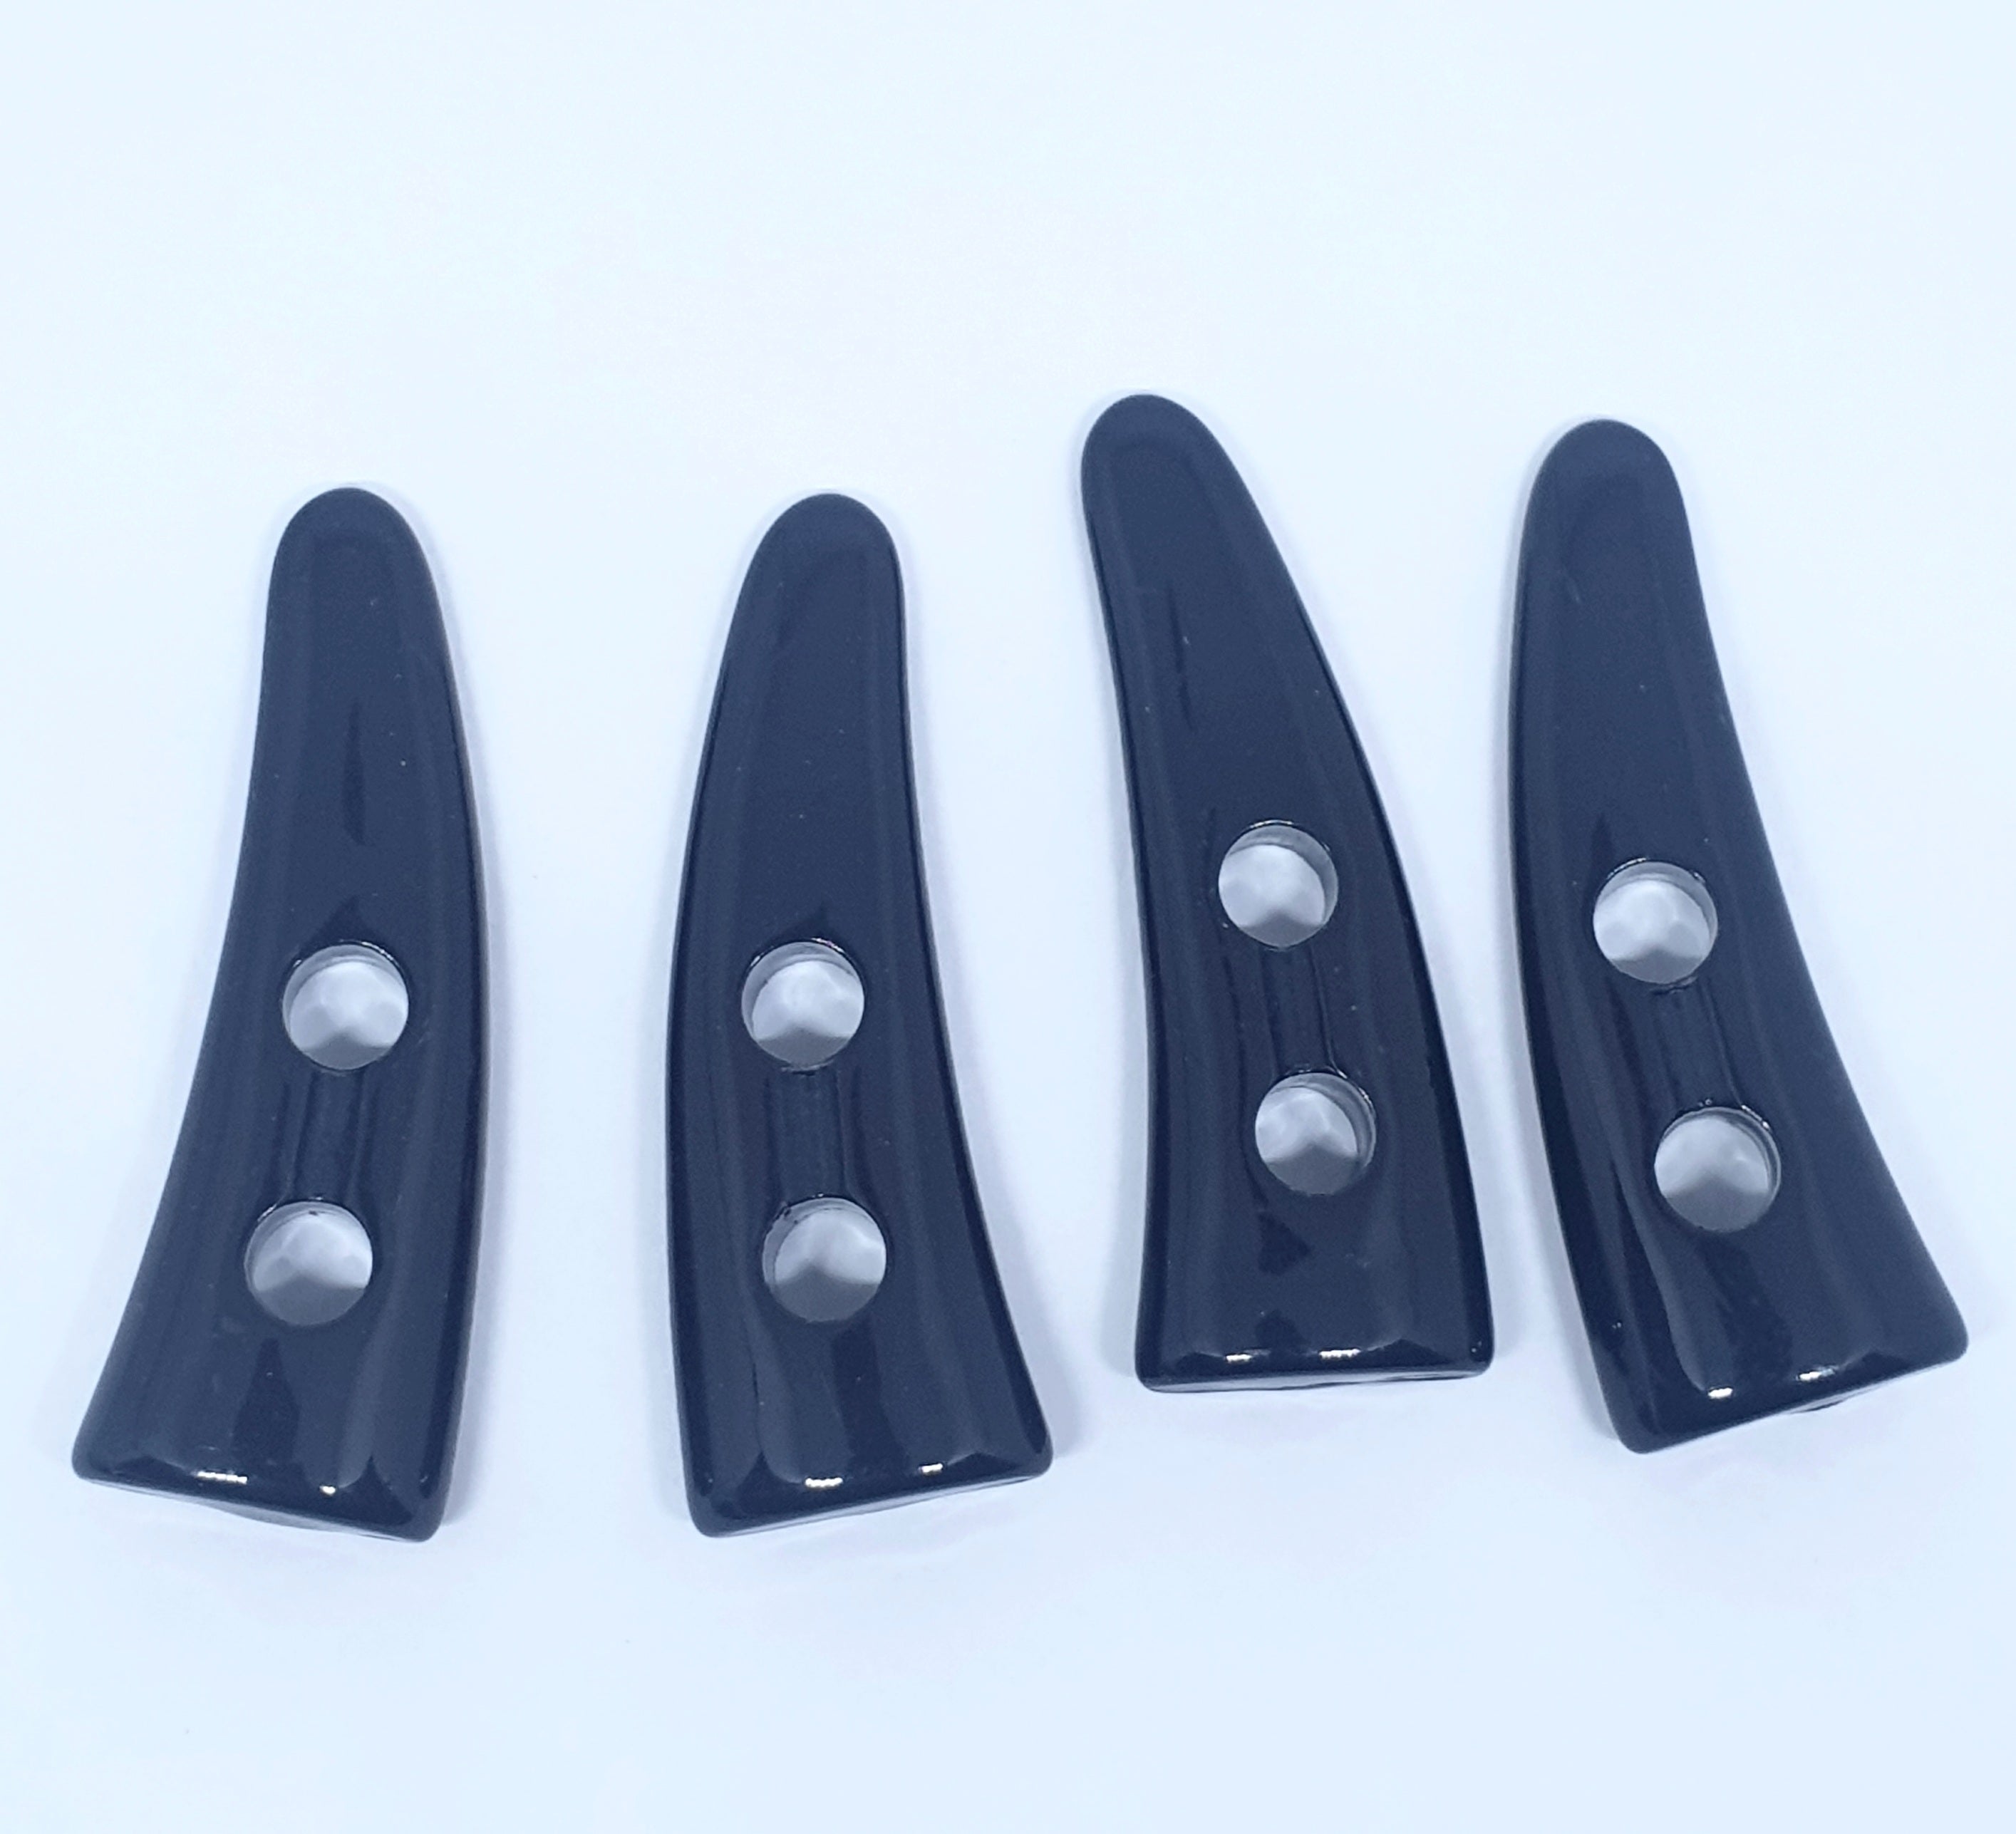 MajorCrafts 10pcs 50mm Black Horn/Tooth Side Curved 2 Holes Sewing Toggle Large Acrylic Buttons